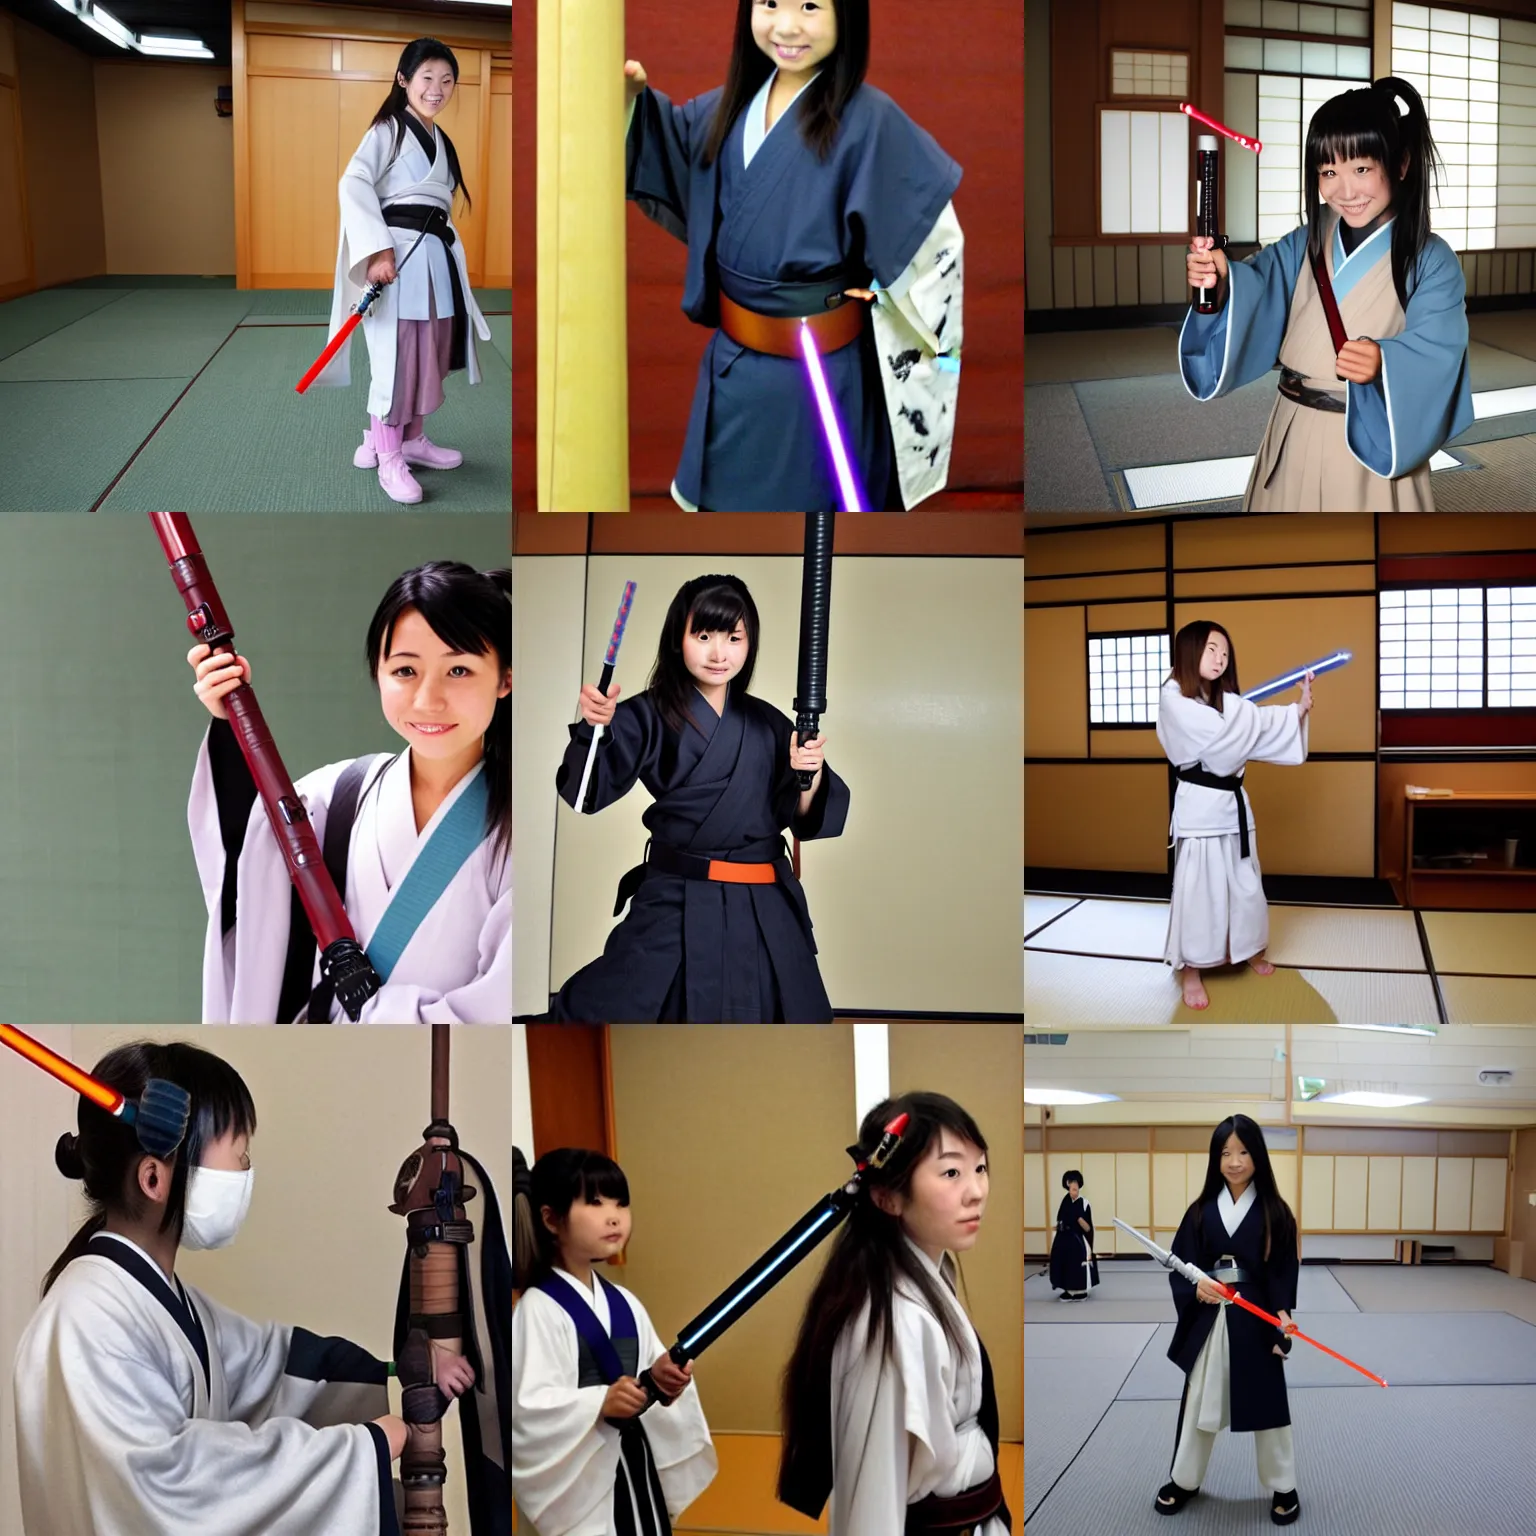 Prompt: A Japanese schoolgirl as a Jedi Knight, wearing Jedi robes, with a lightsaber on her belt, in a Japanese dojo